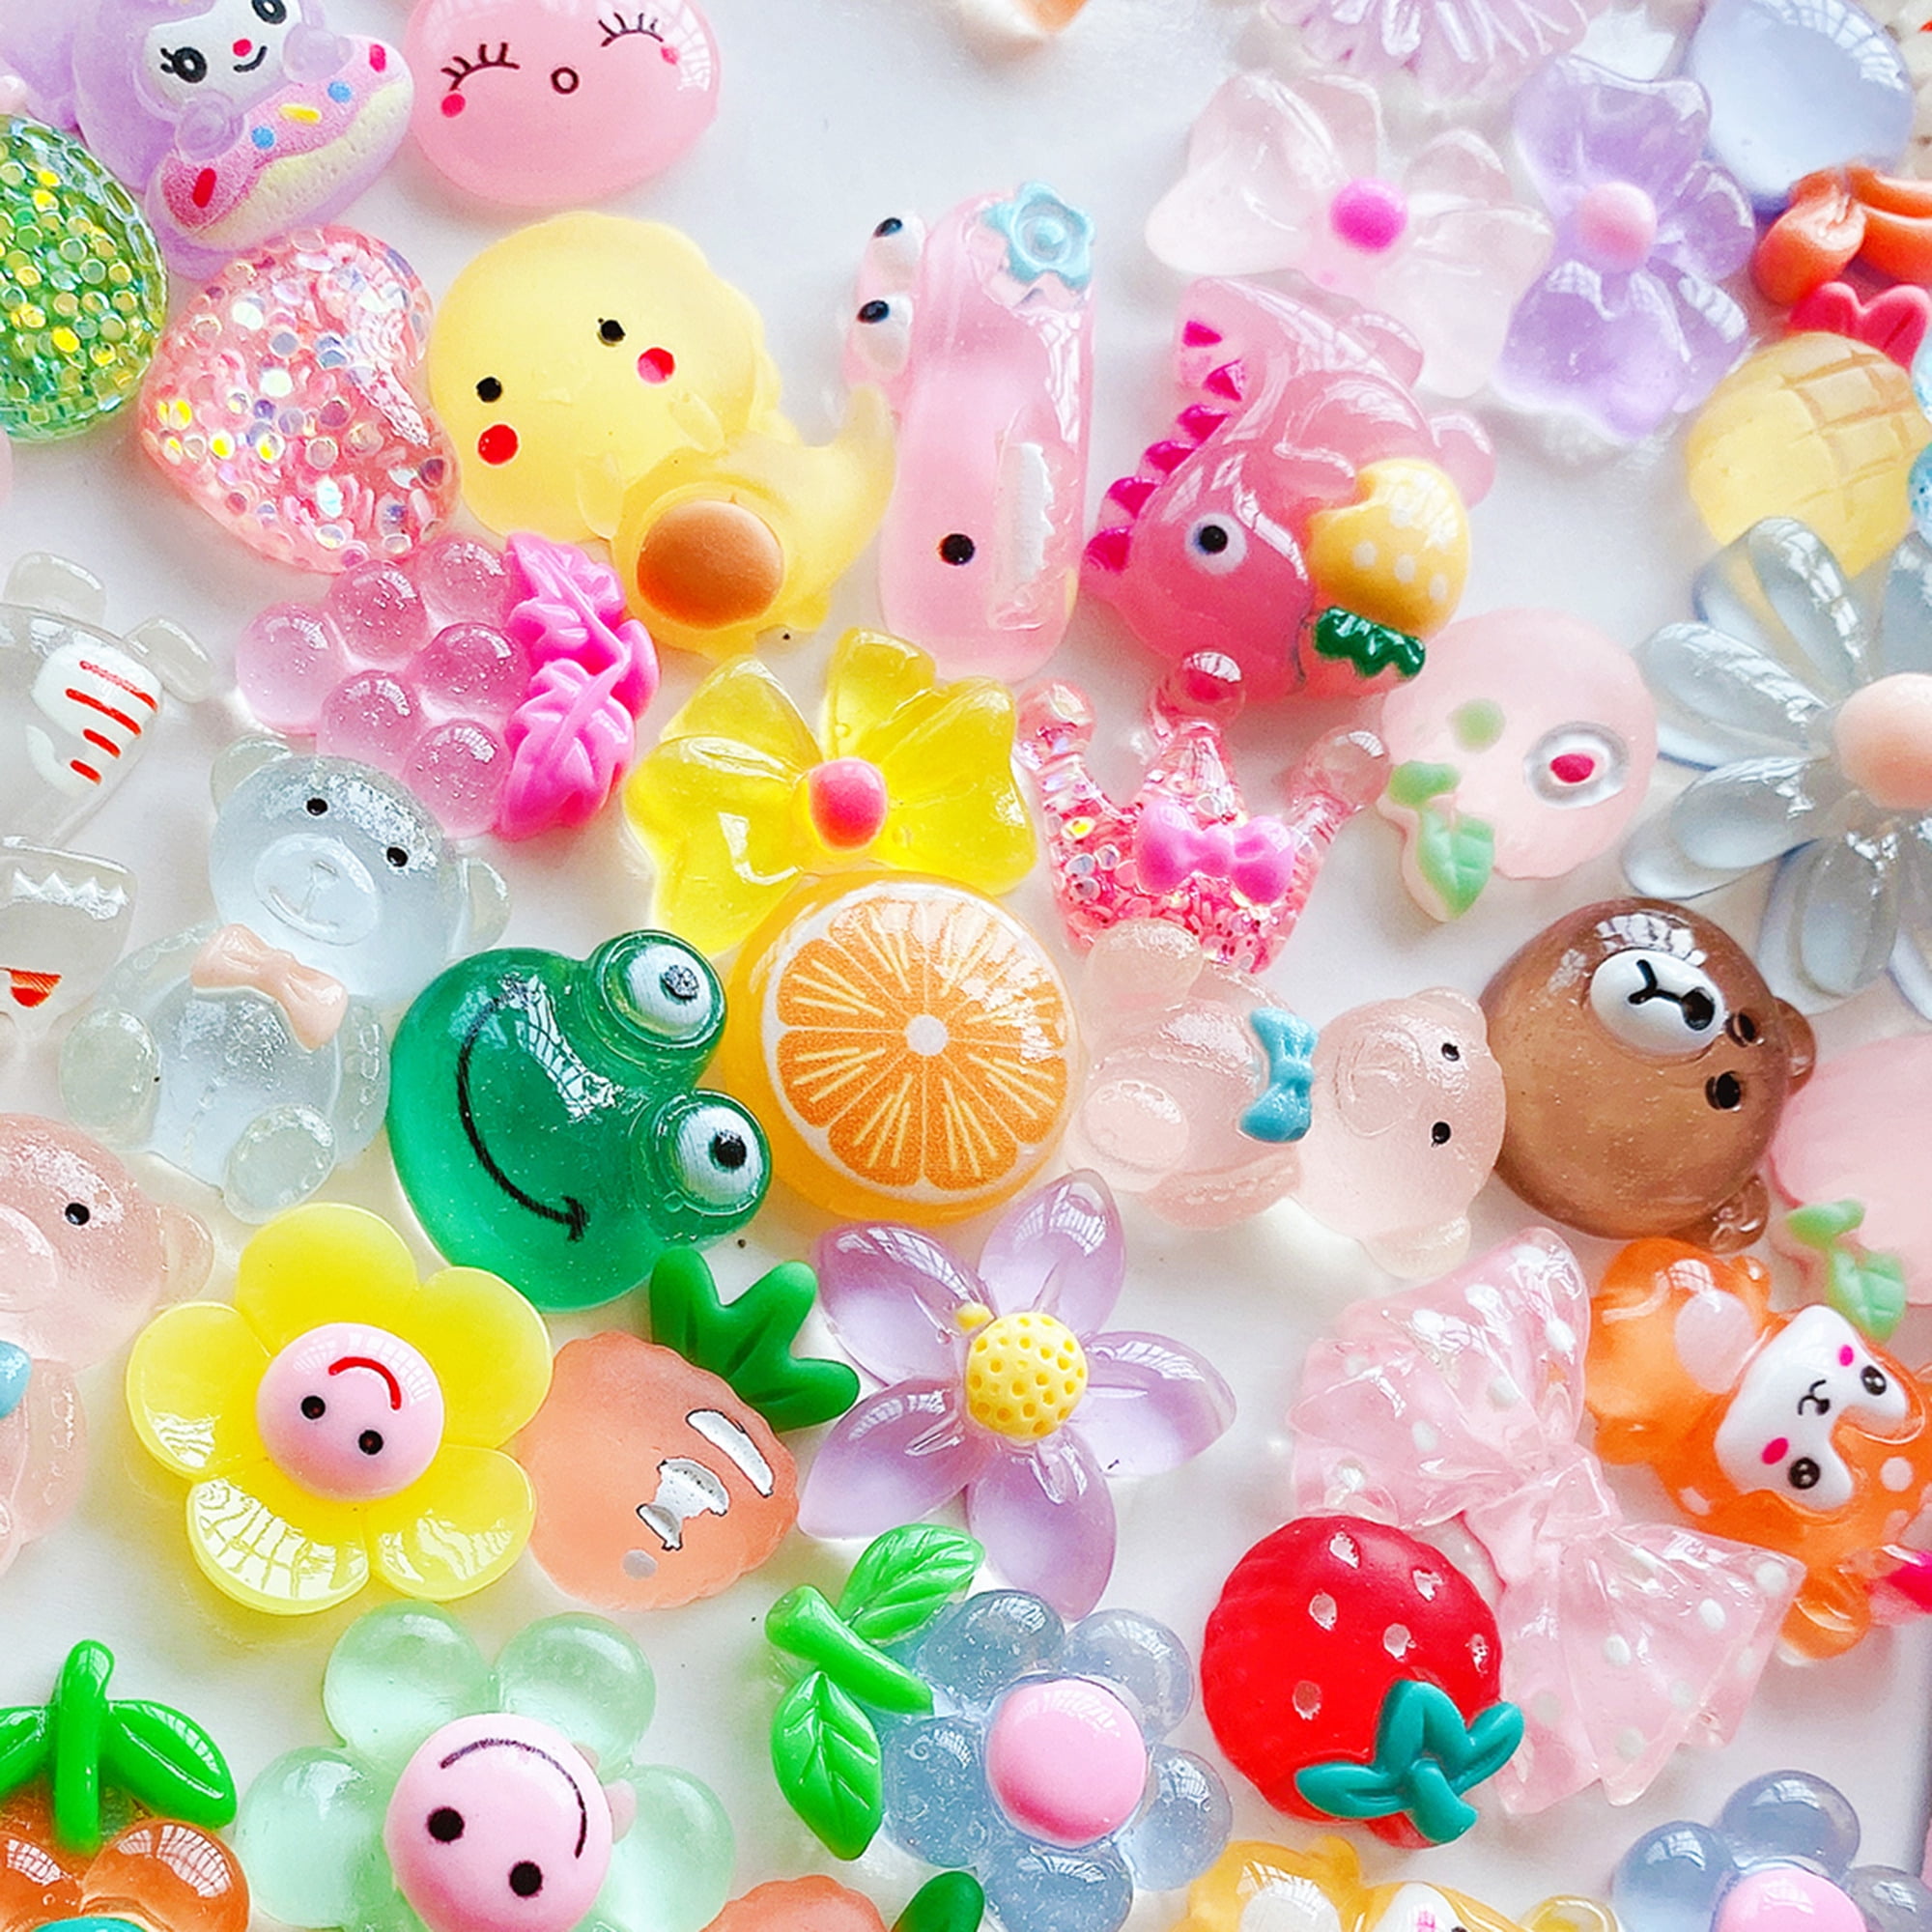 20/40/60 PCS Slime Charms Mixed Cute Snacks Food & Cake Resin Flatback  Cabochon Crafts for DIY Handmade Craft Making Scrapbooking